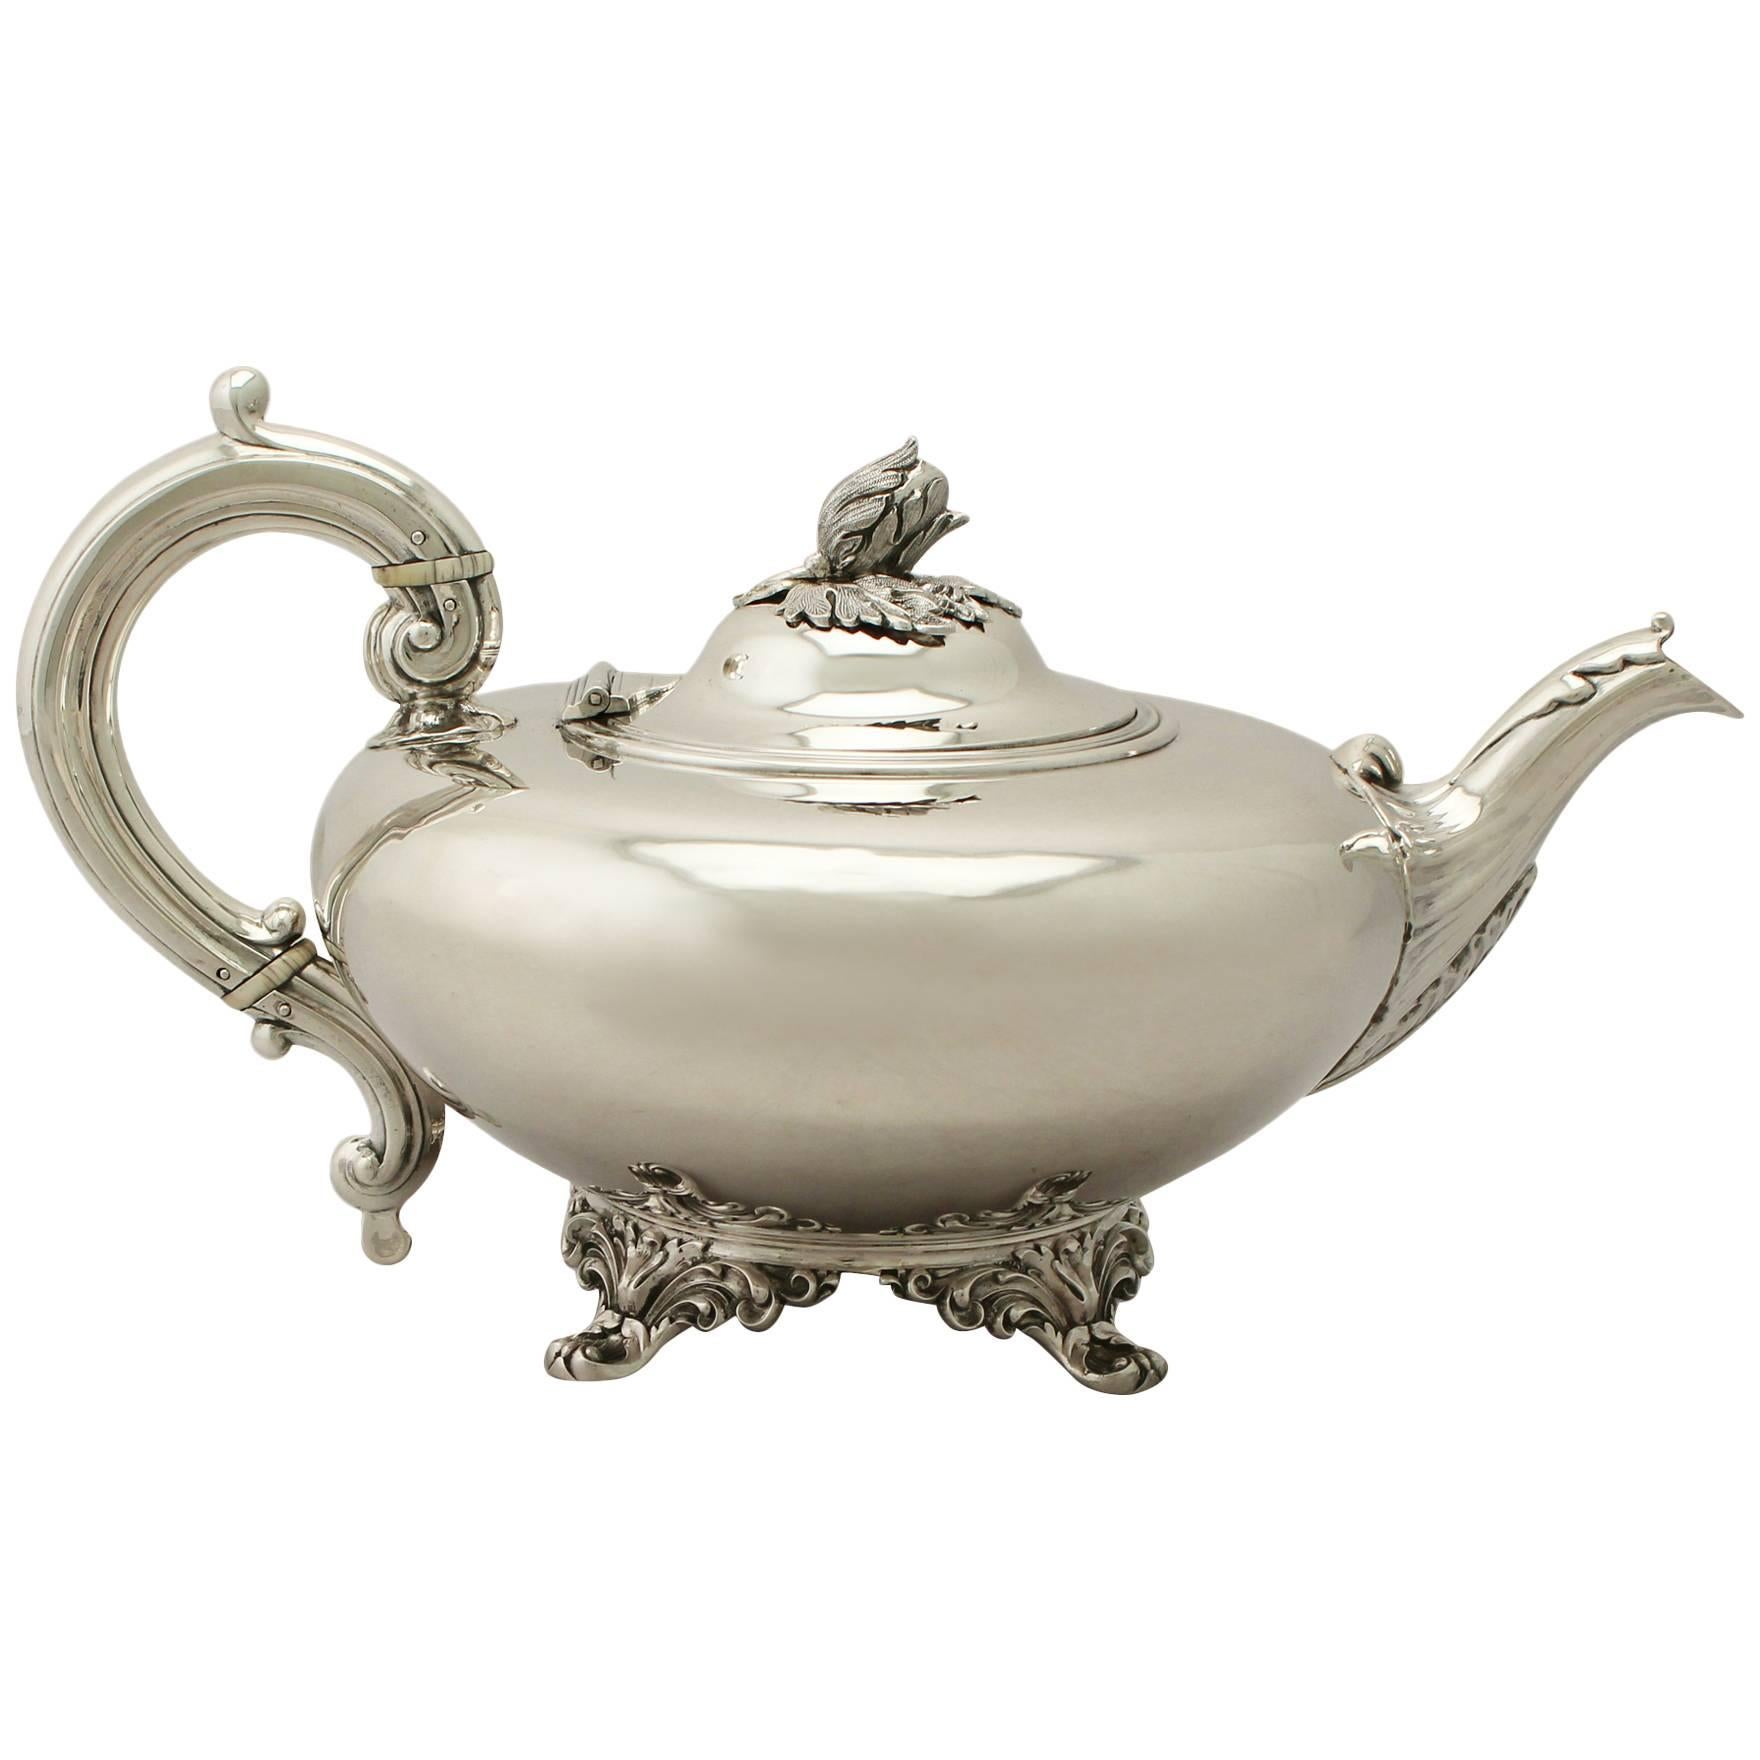 1830s Antique Victorian Sterling Silver Teapot